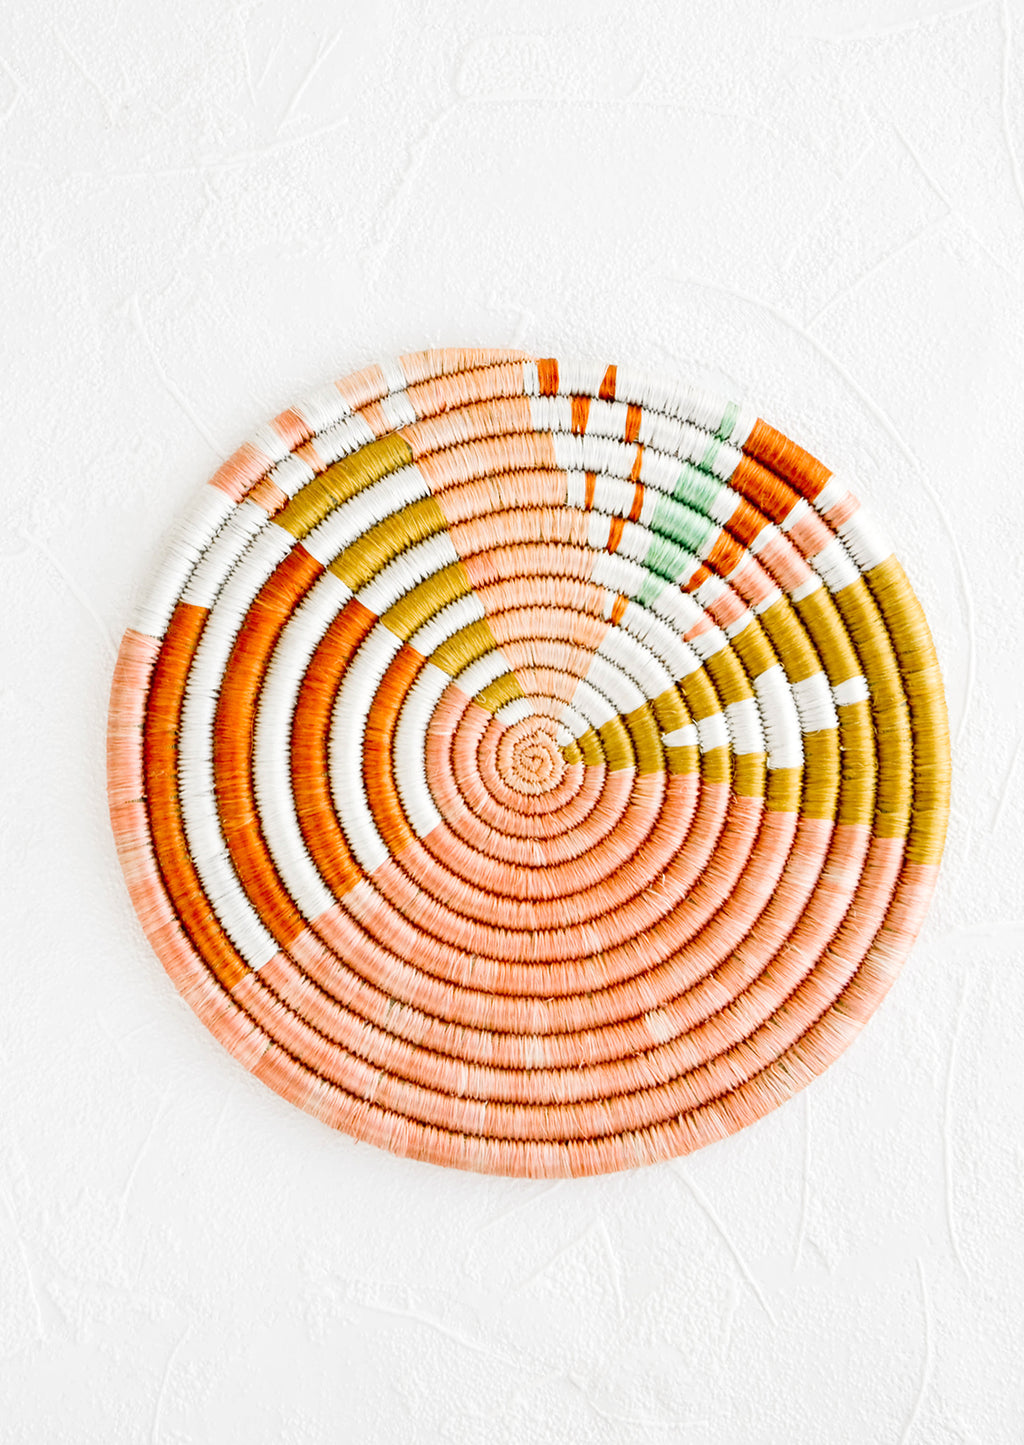 2: Colorful round trivet made from dyed raffia in a geometric pattern and pastel hues